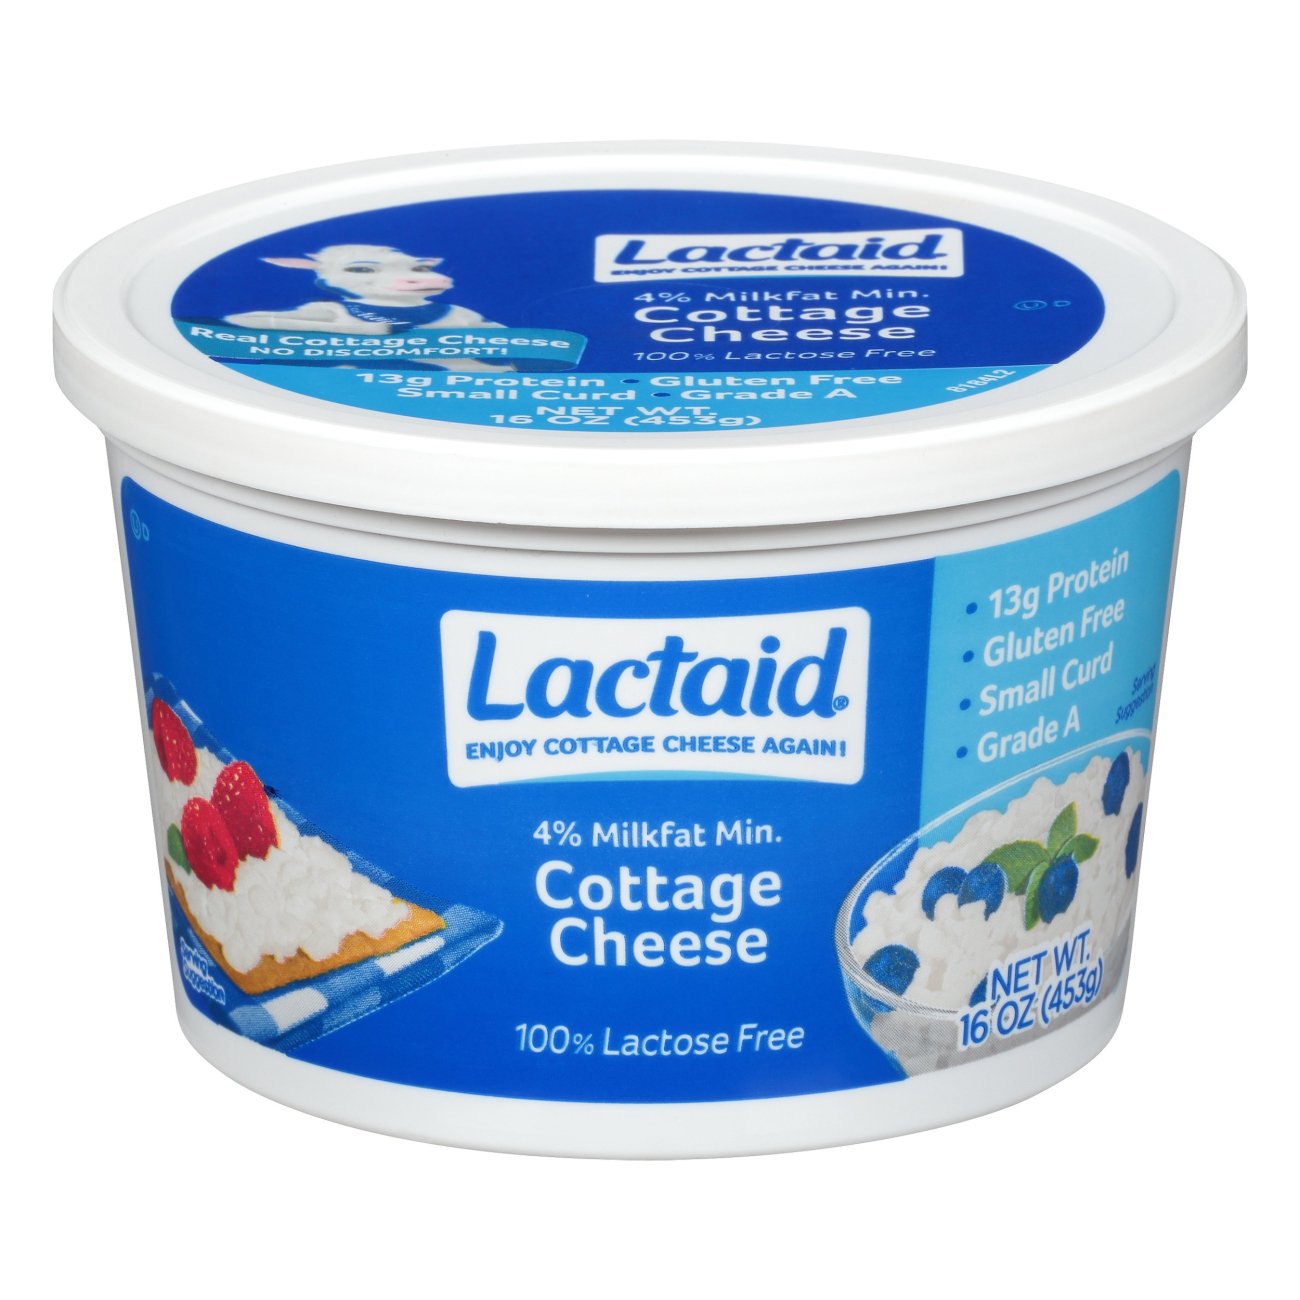 Lactaid 4 Milk Fat Cottage Cheese Shop Cottage Cheese at HEB